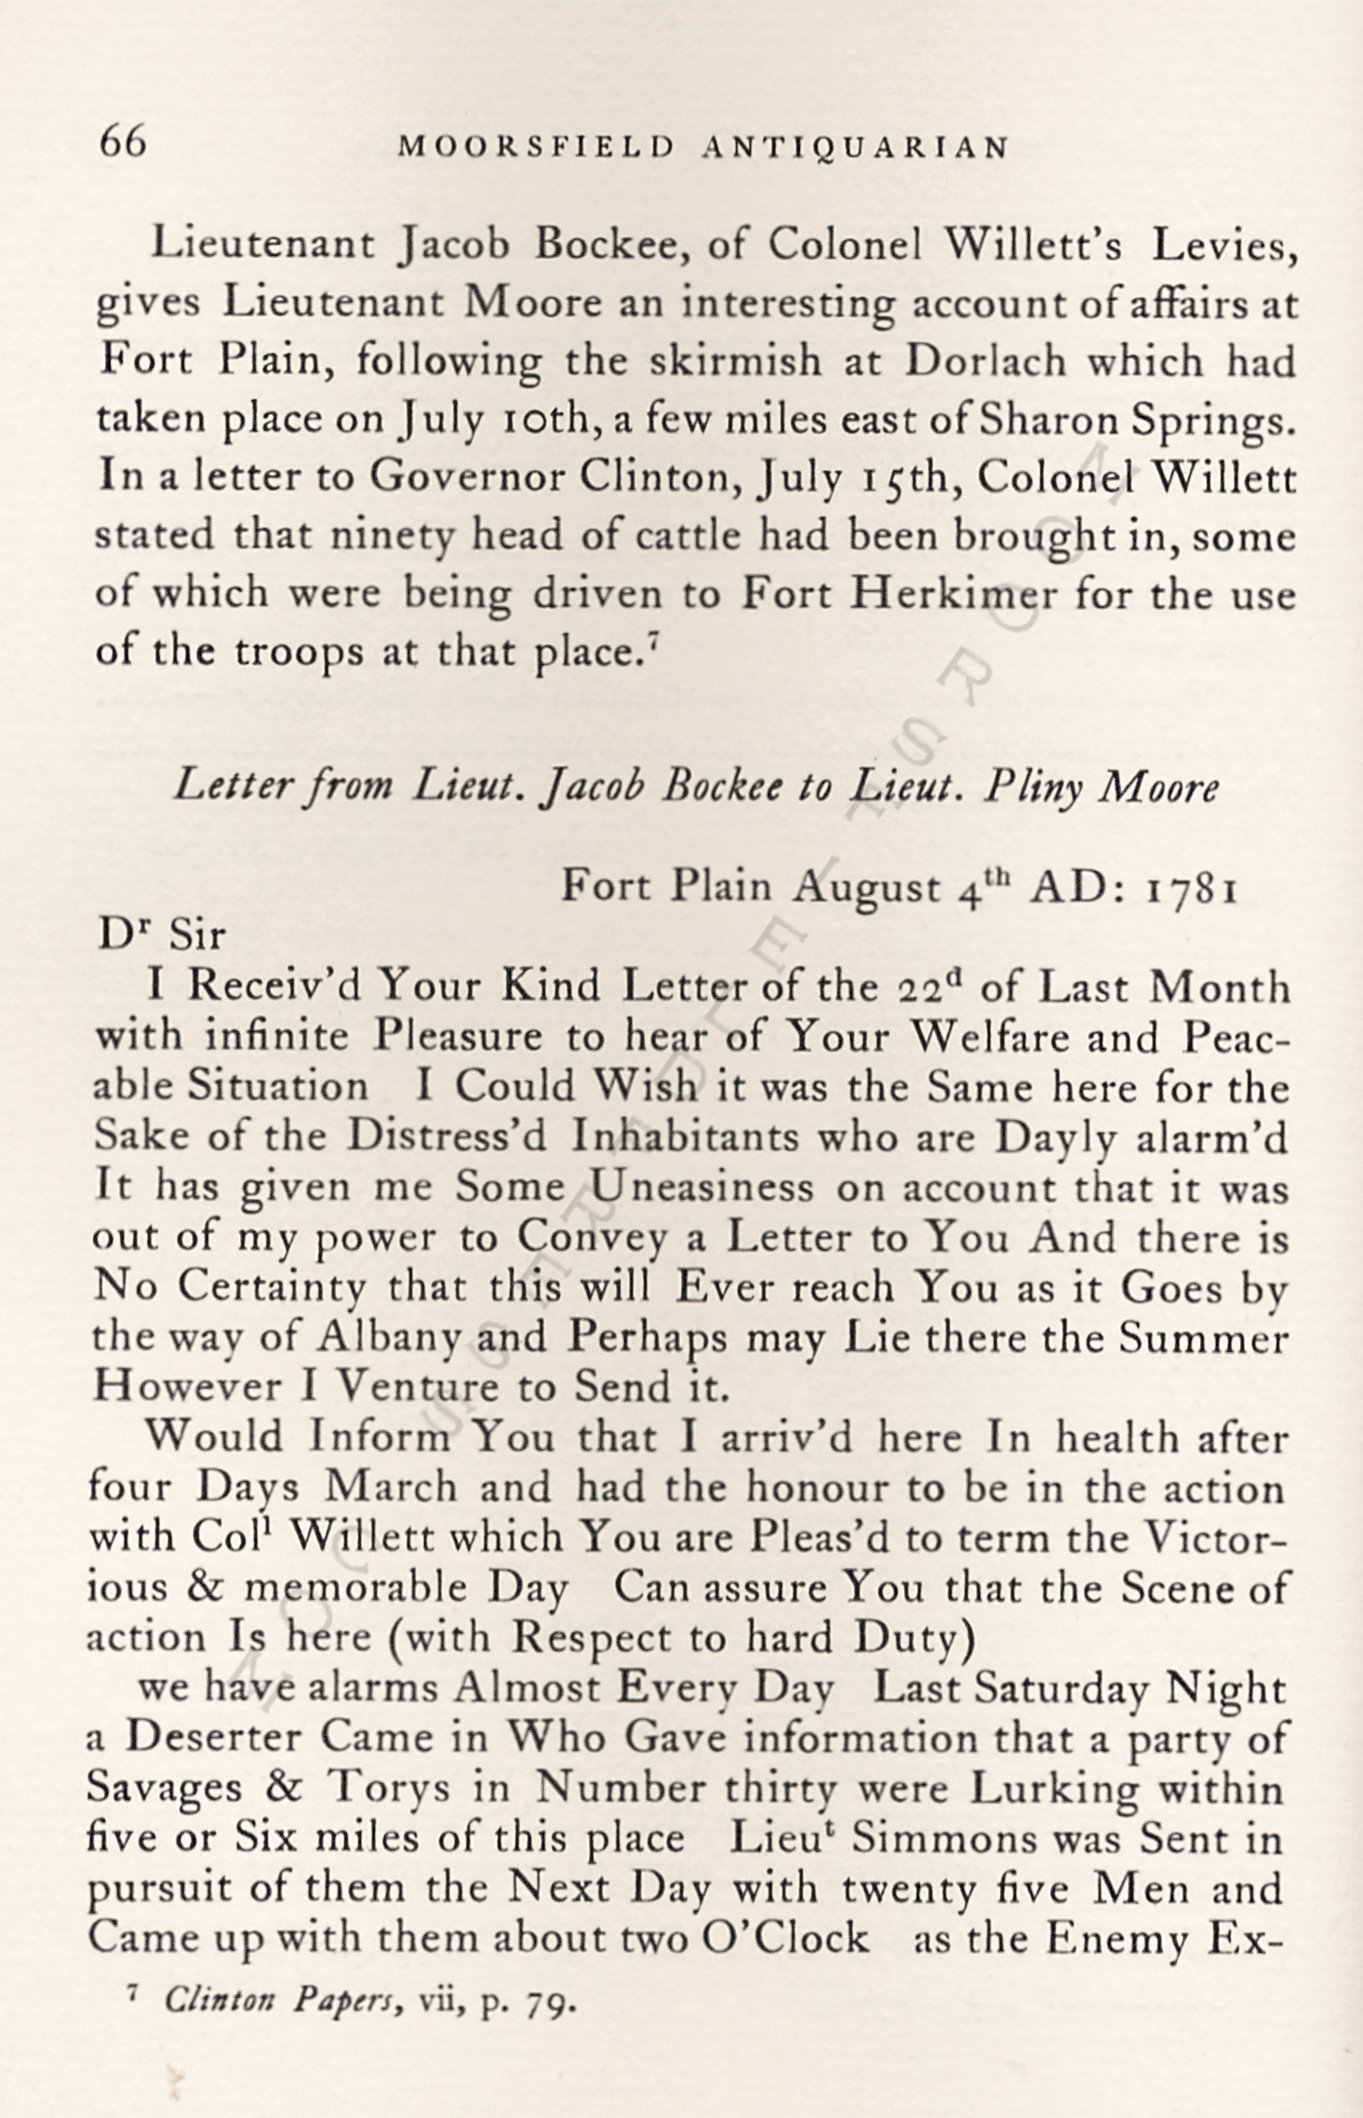 The Year
                      1781 at Saratoga: Col. Marinus Willett’s Regiment
                      of Levies